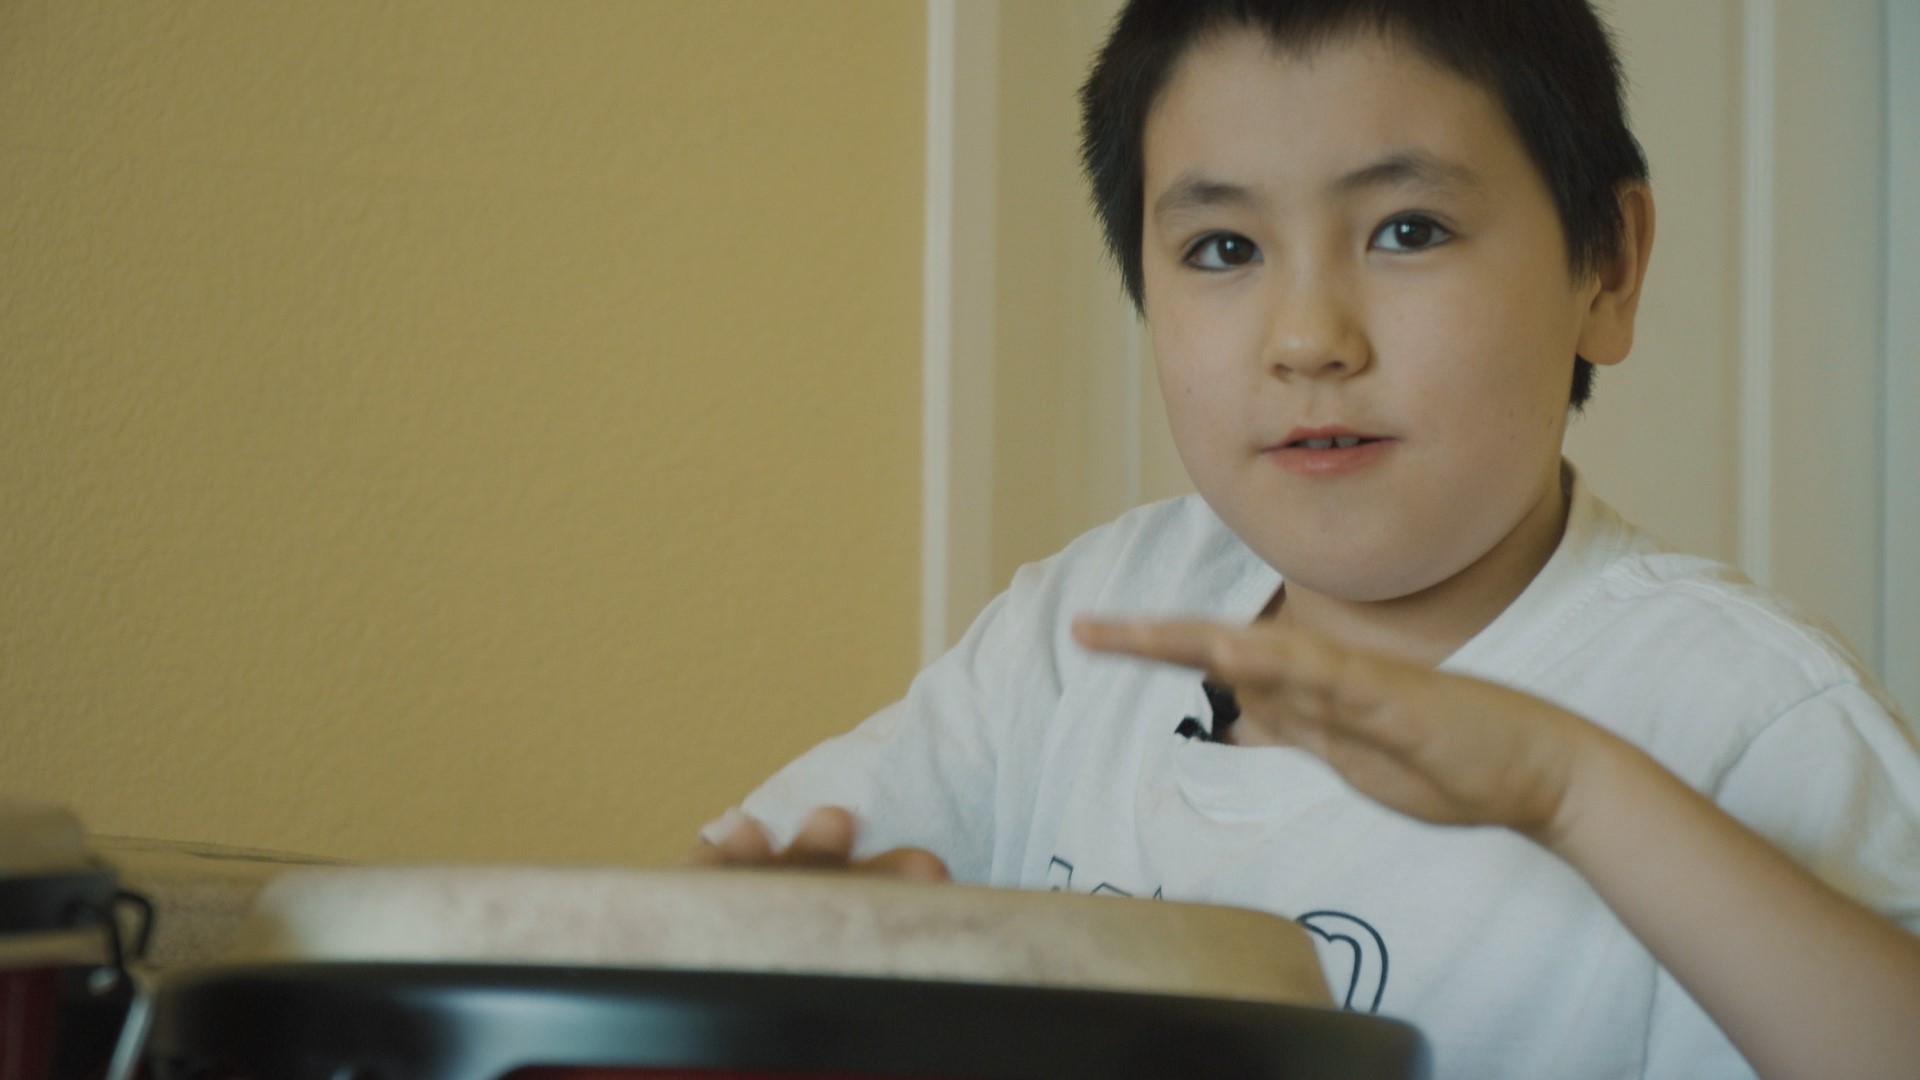 Although Max doesn't communicate so much with his words, the 10-year-old with autism discovered he can express himself with music.